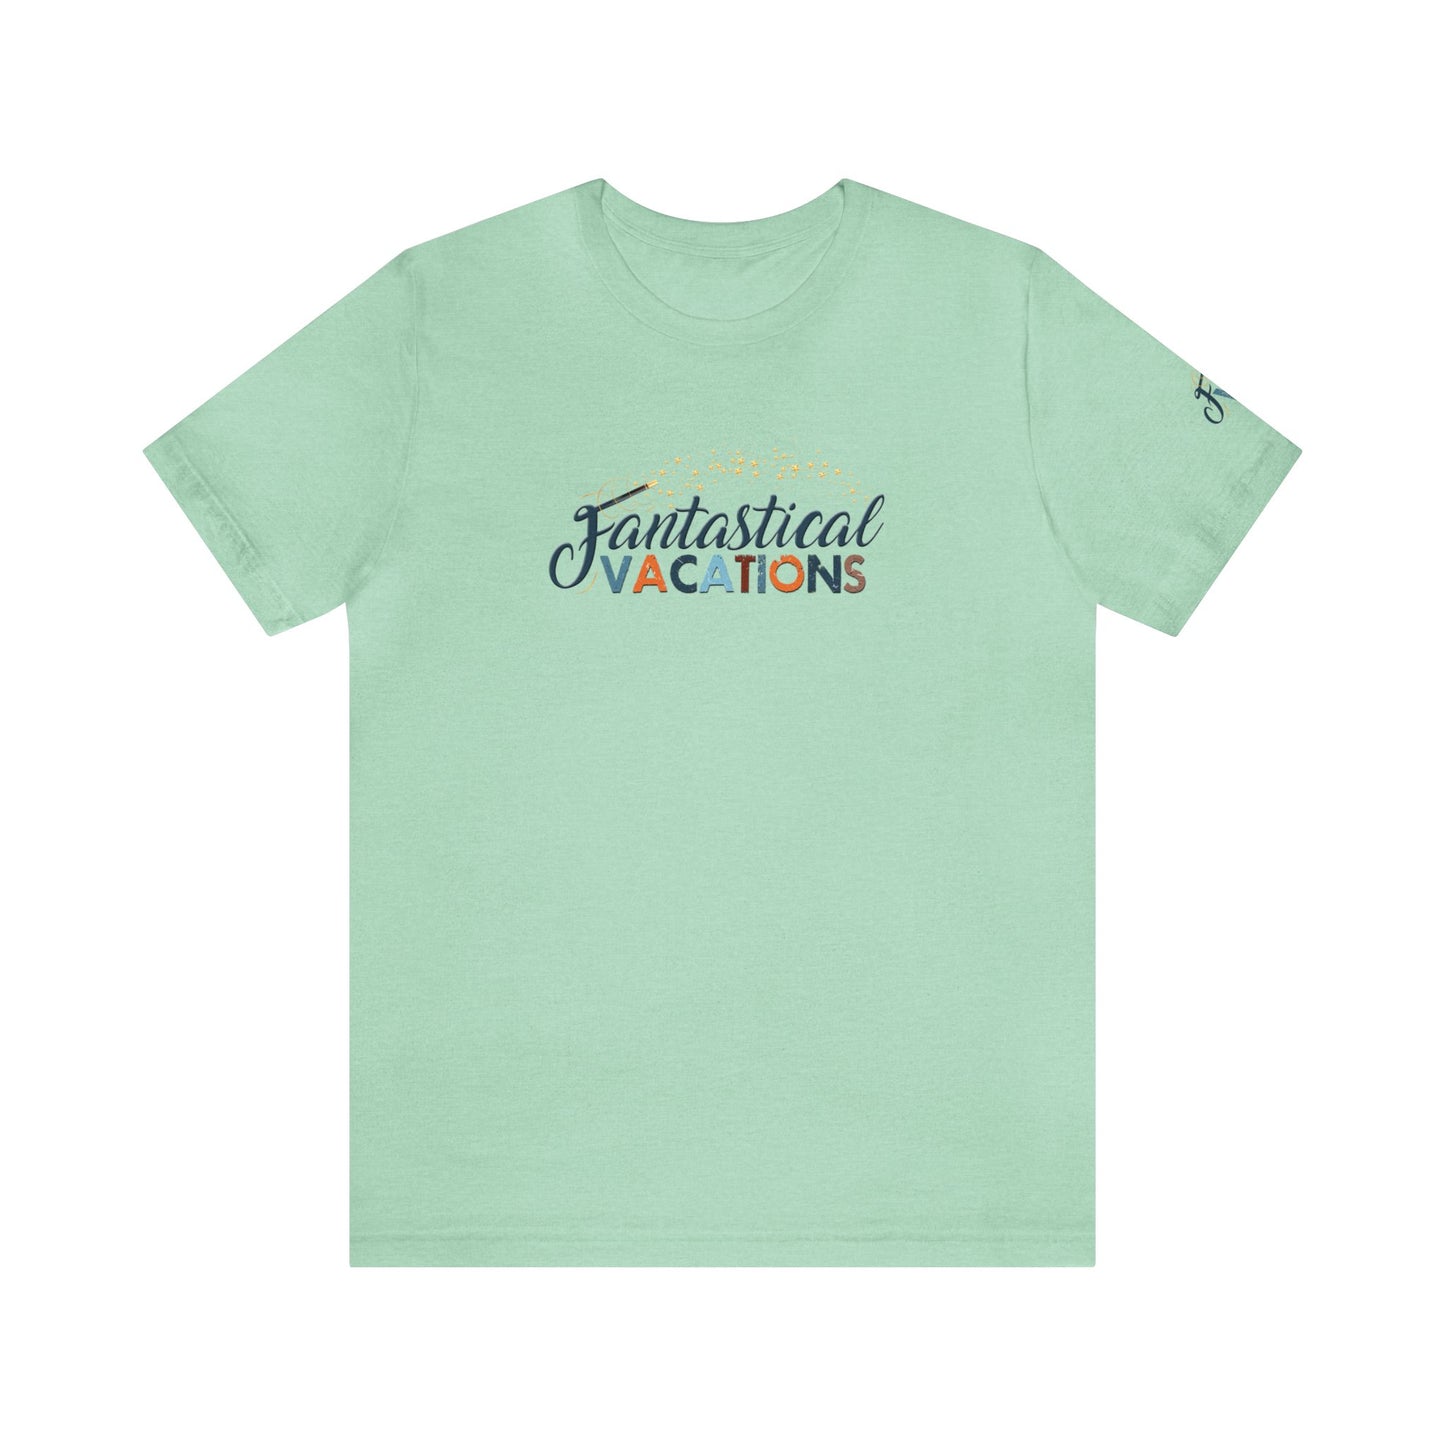 Fantastical Vacations Unisex Tee